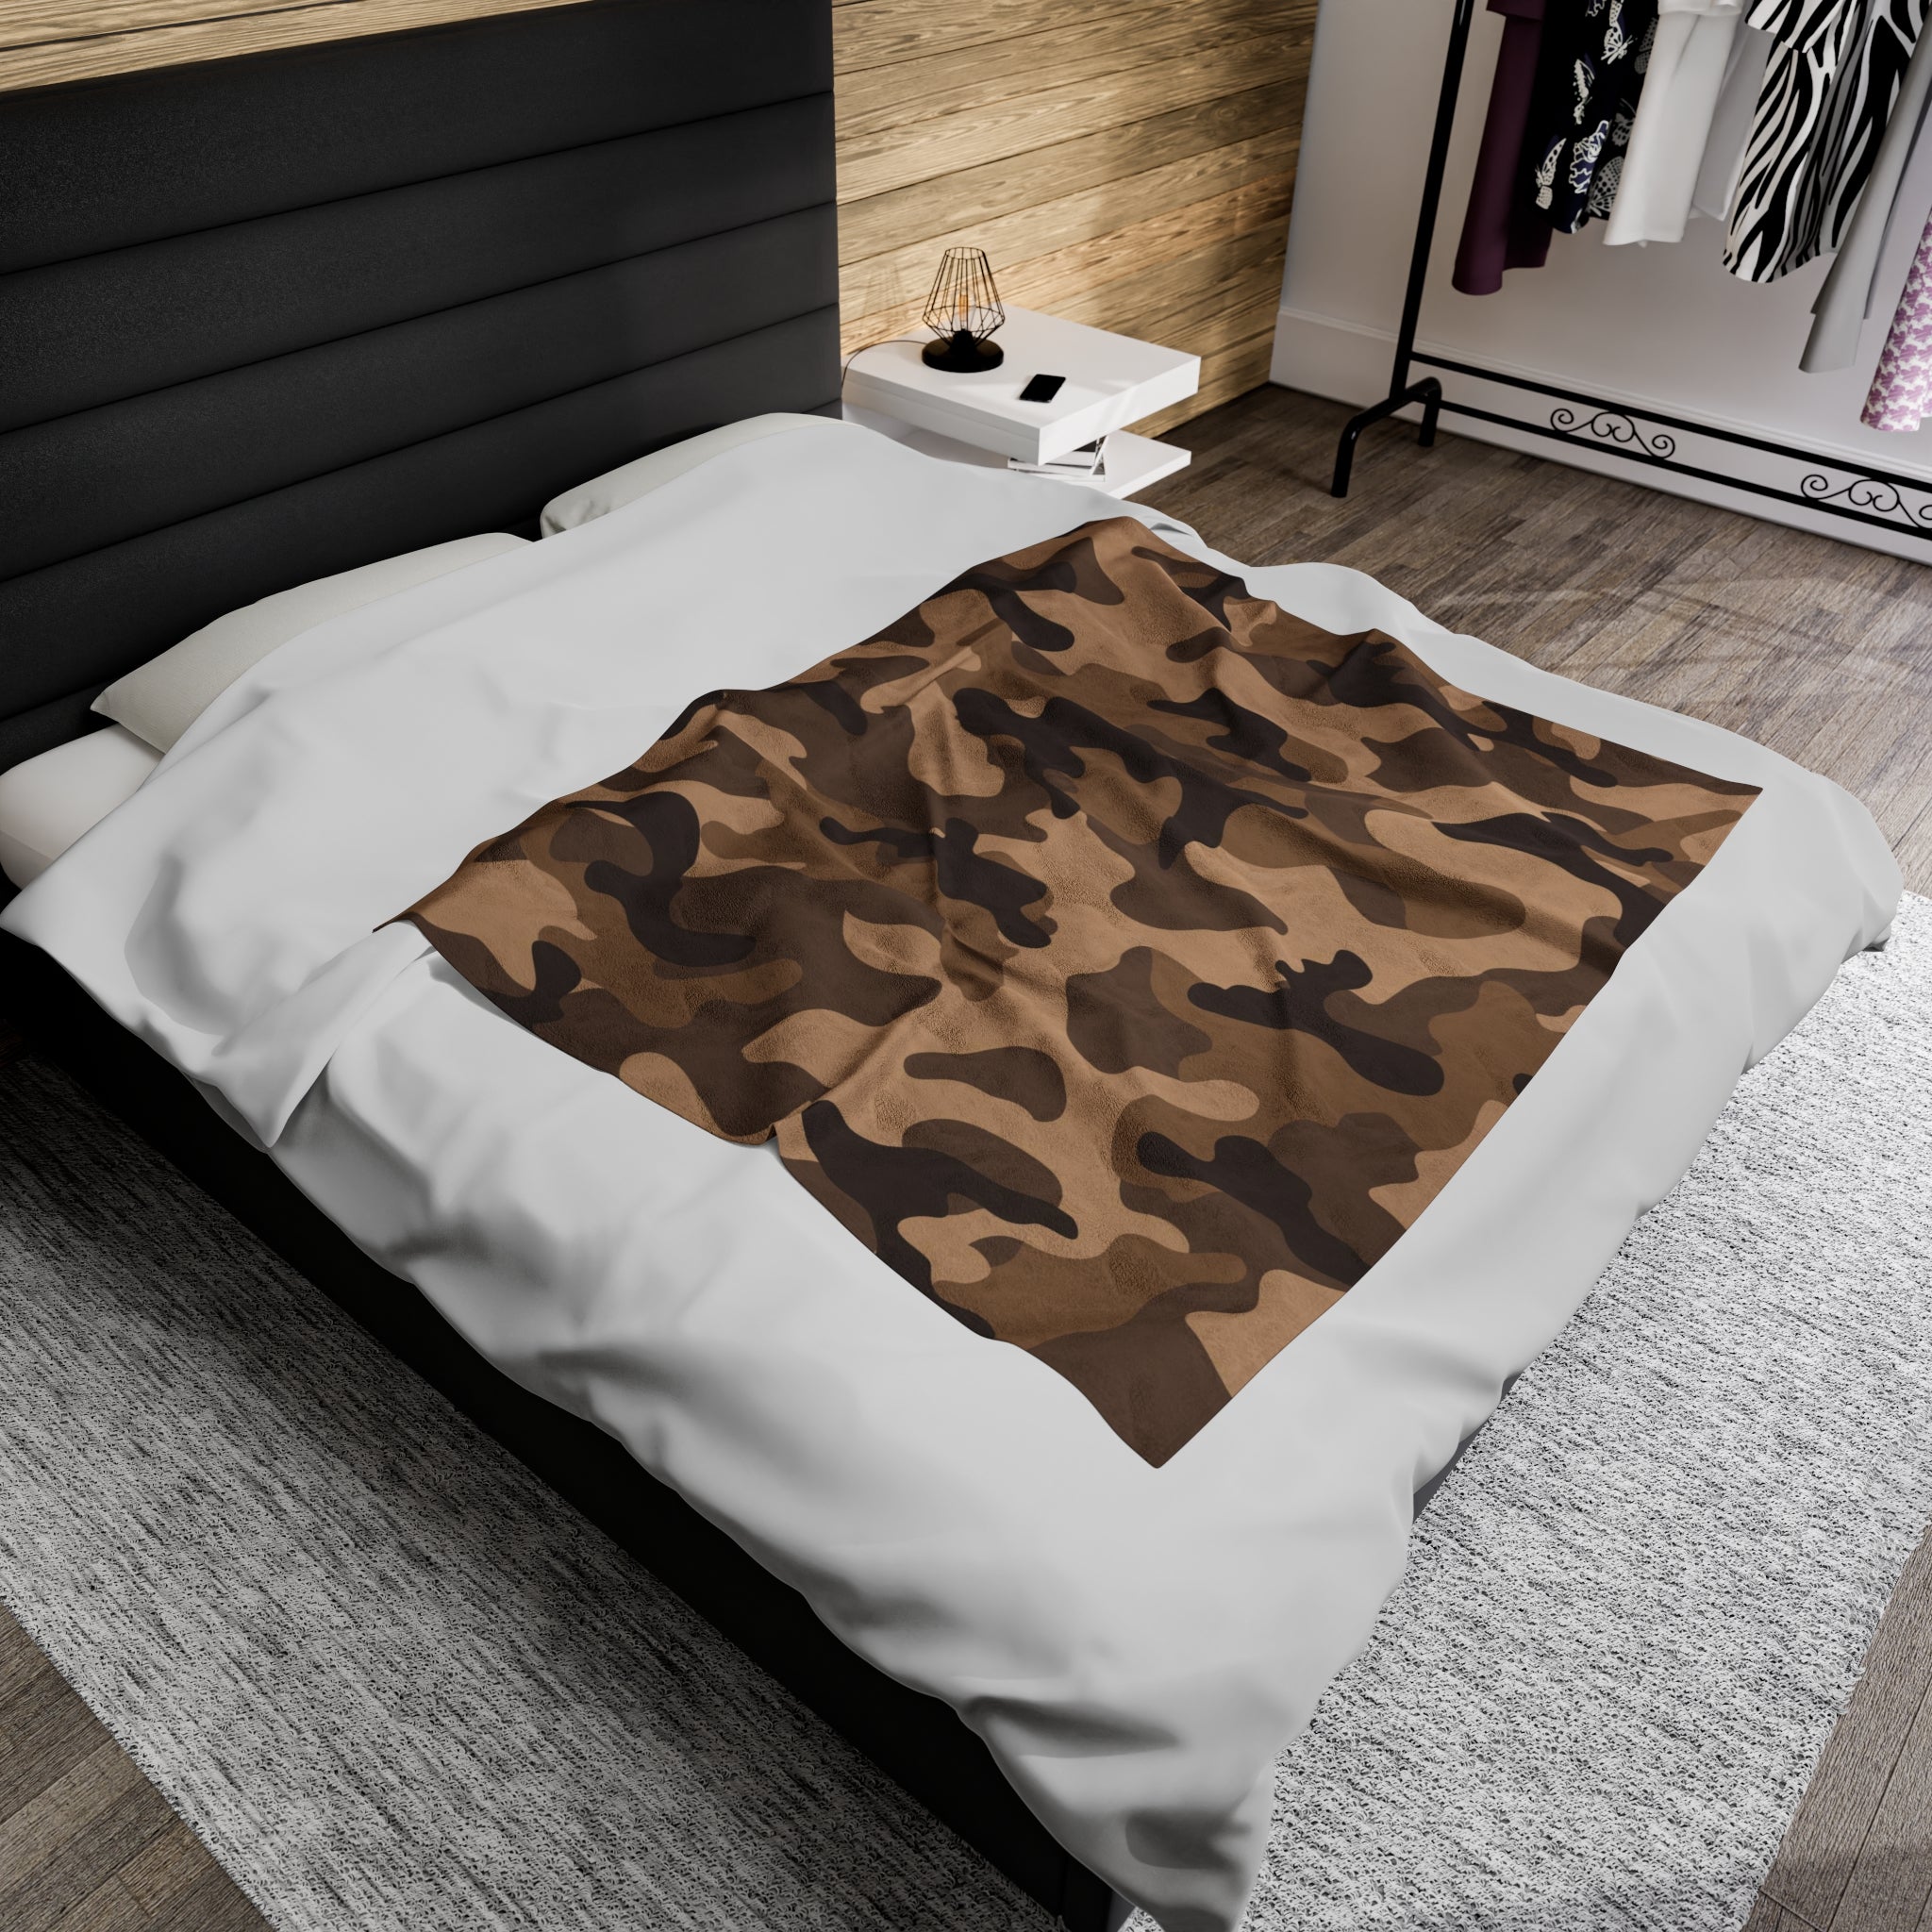 Brown Camo Themed Soft Blanket